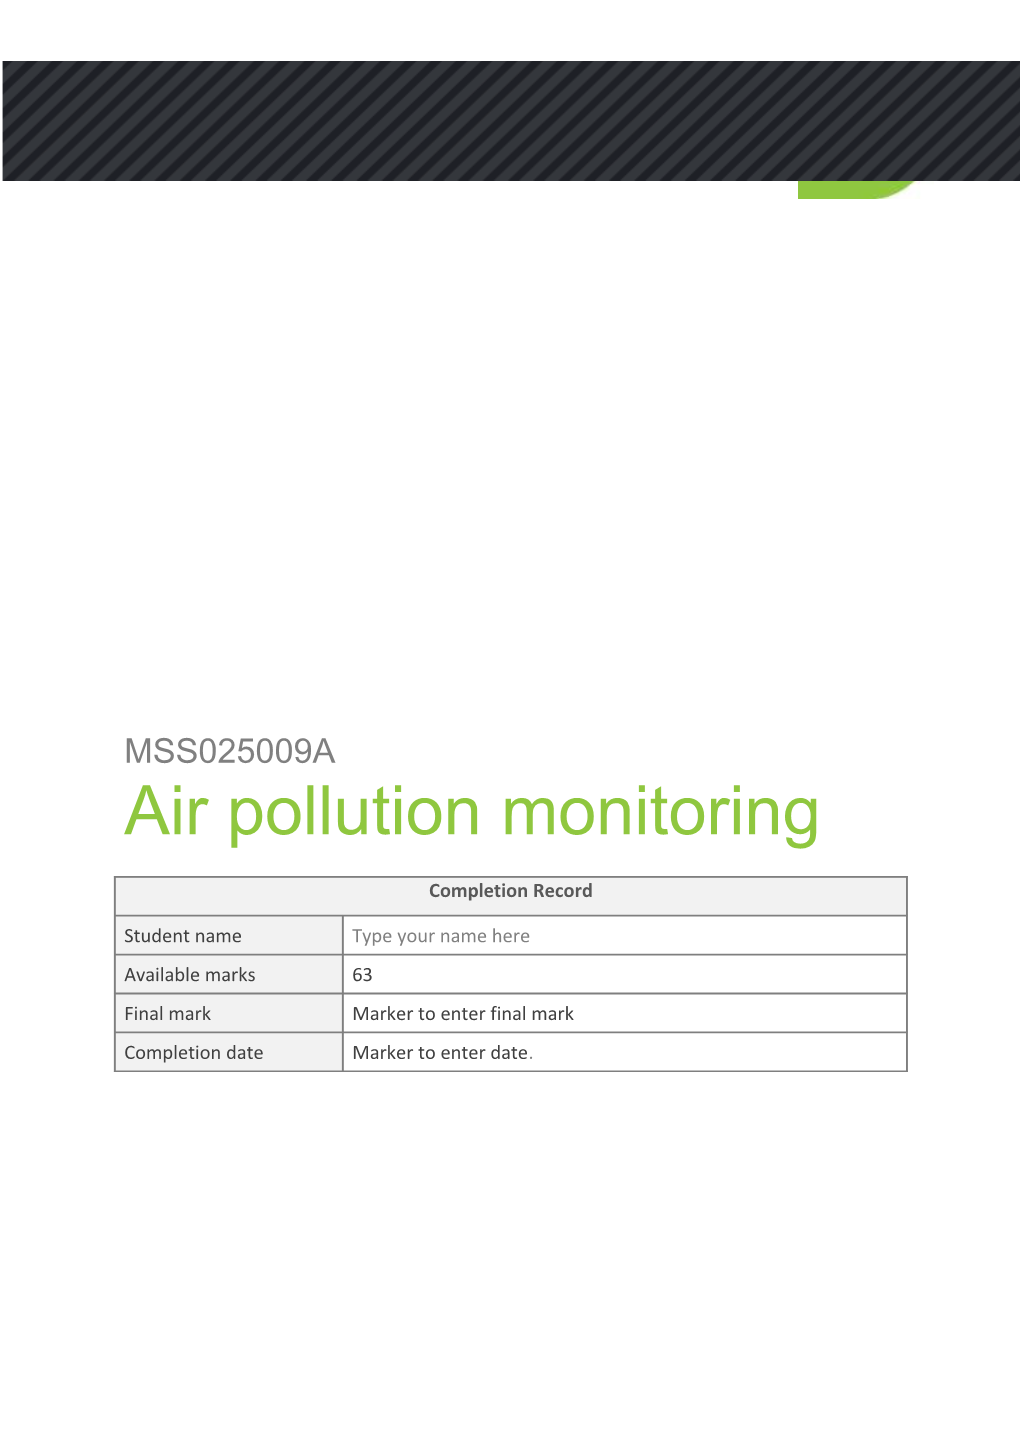 APM Study Module 1 Introduction to Air Pollutionmss025009a